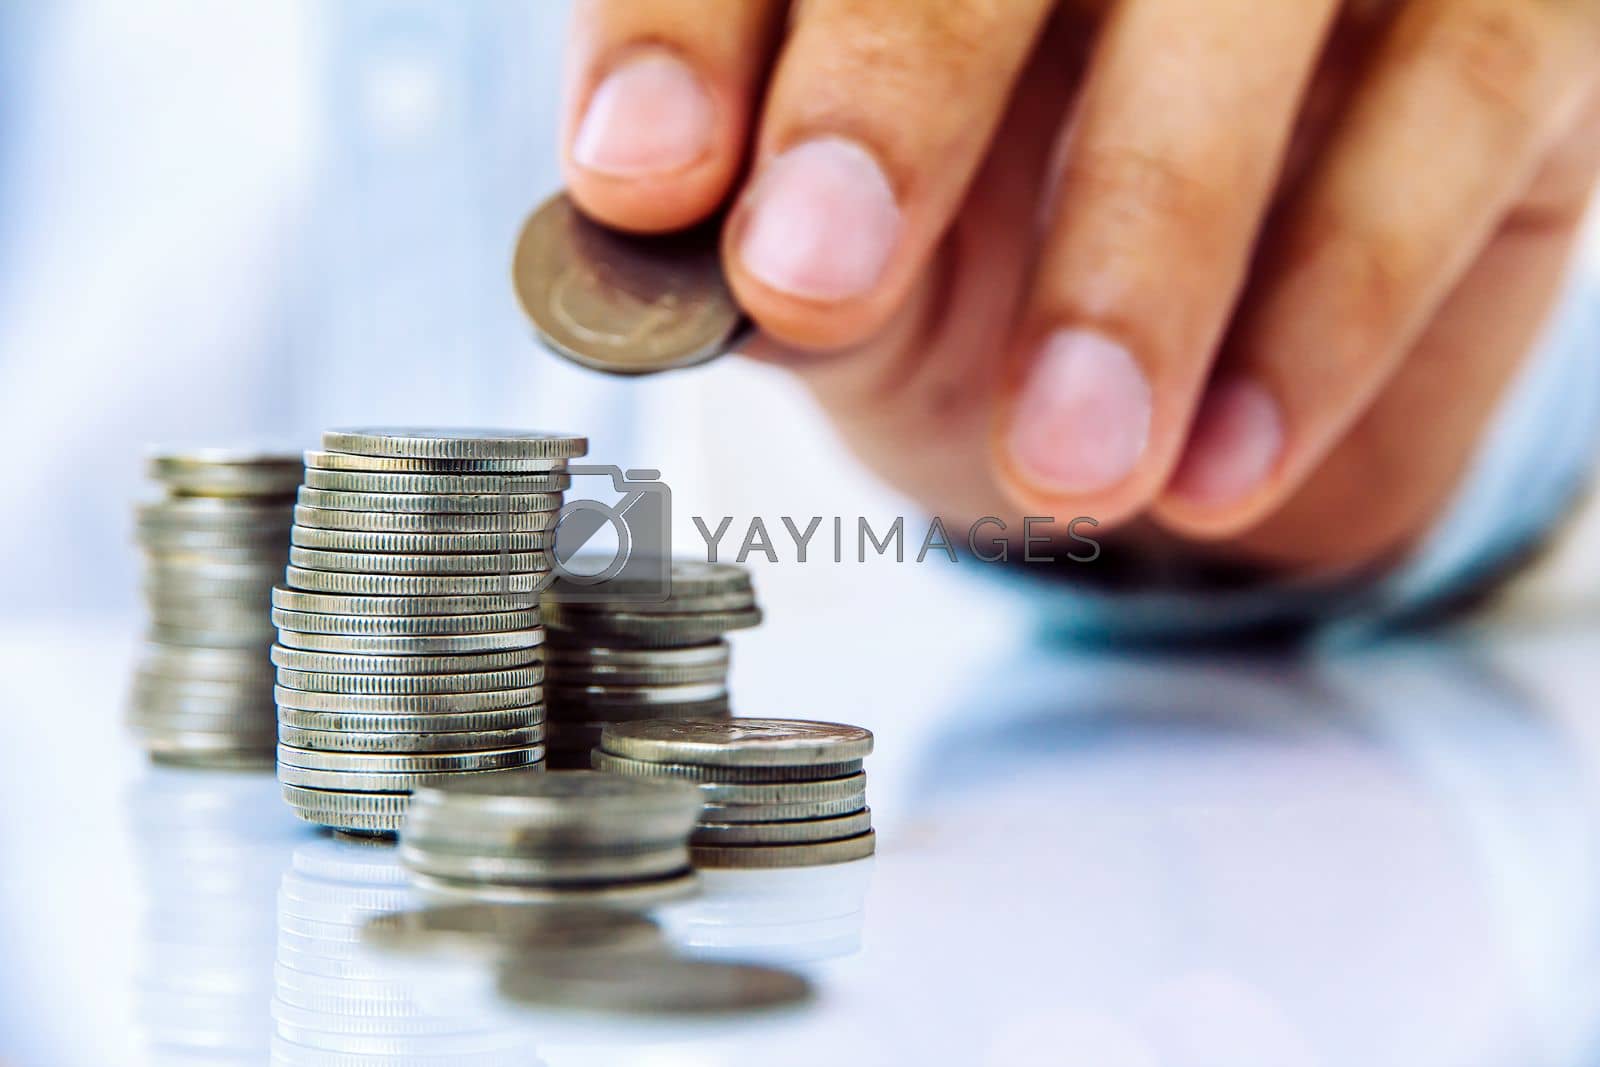 Royalty free image of Hand put coin to stack, investment concept by ponsulak